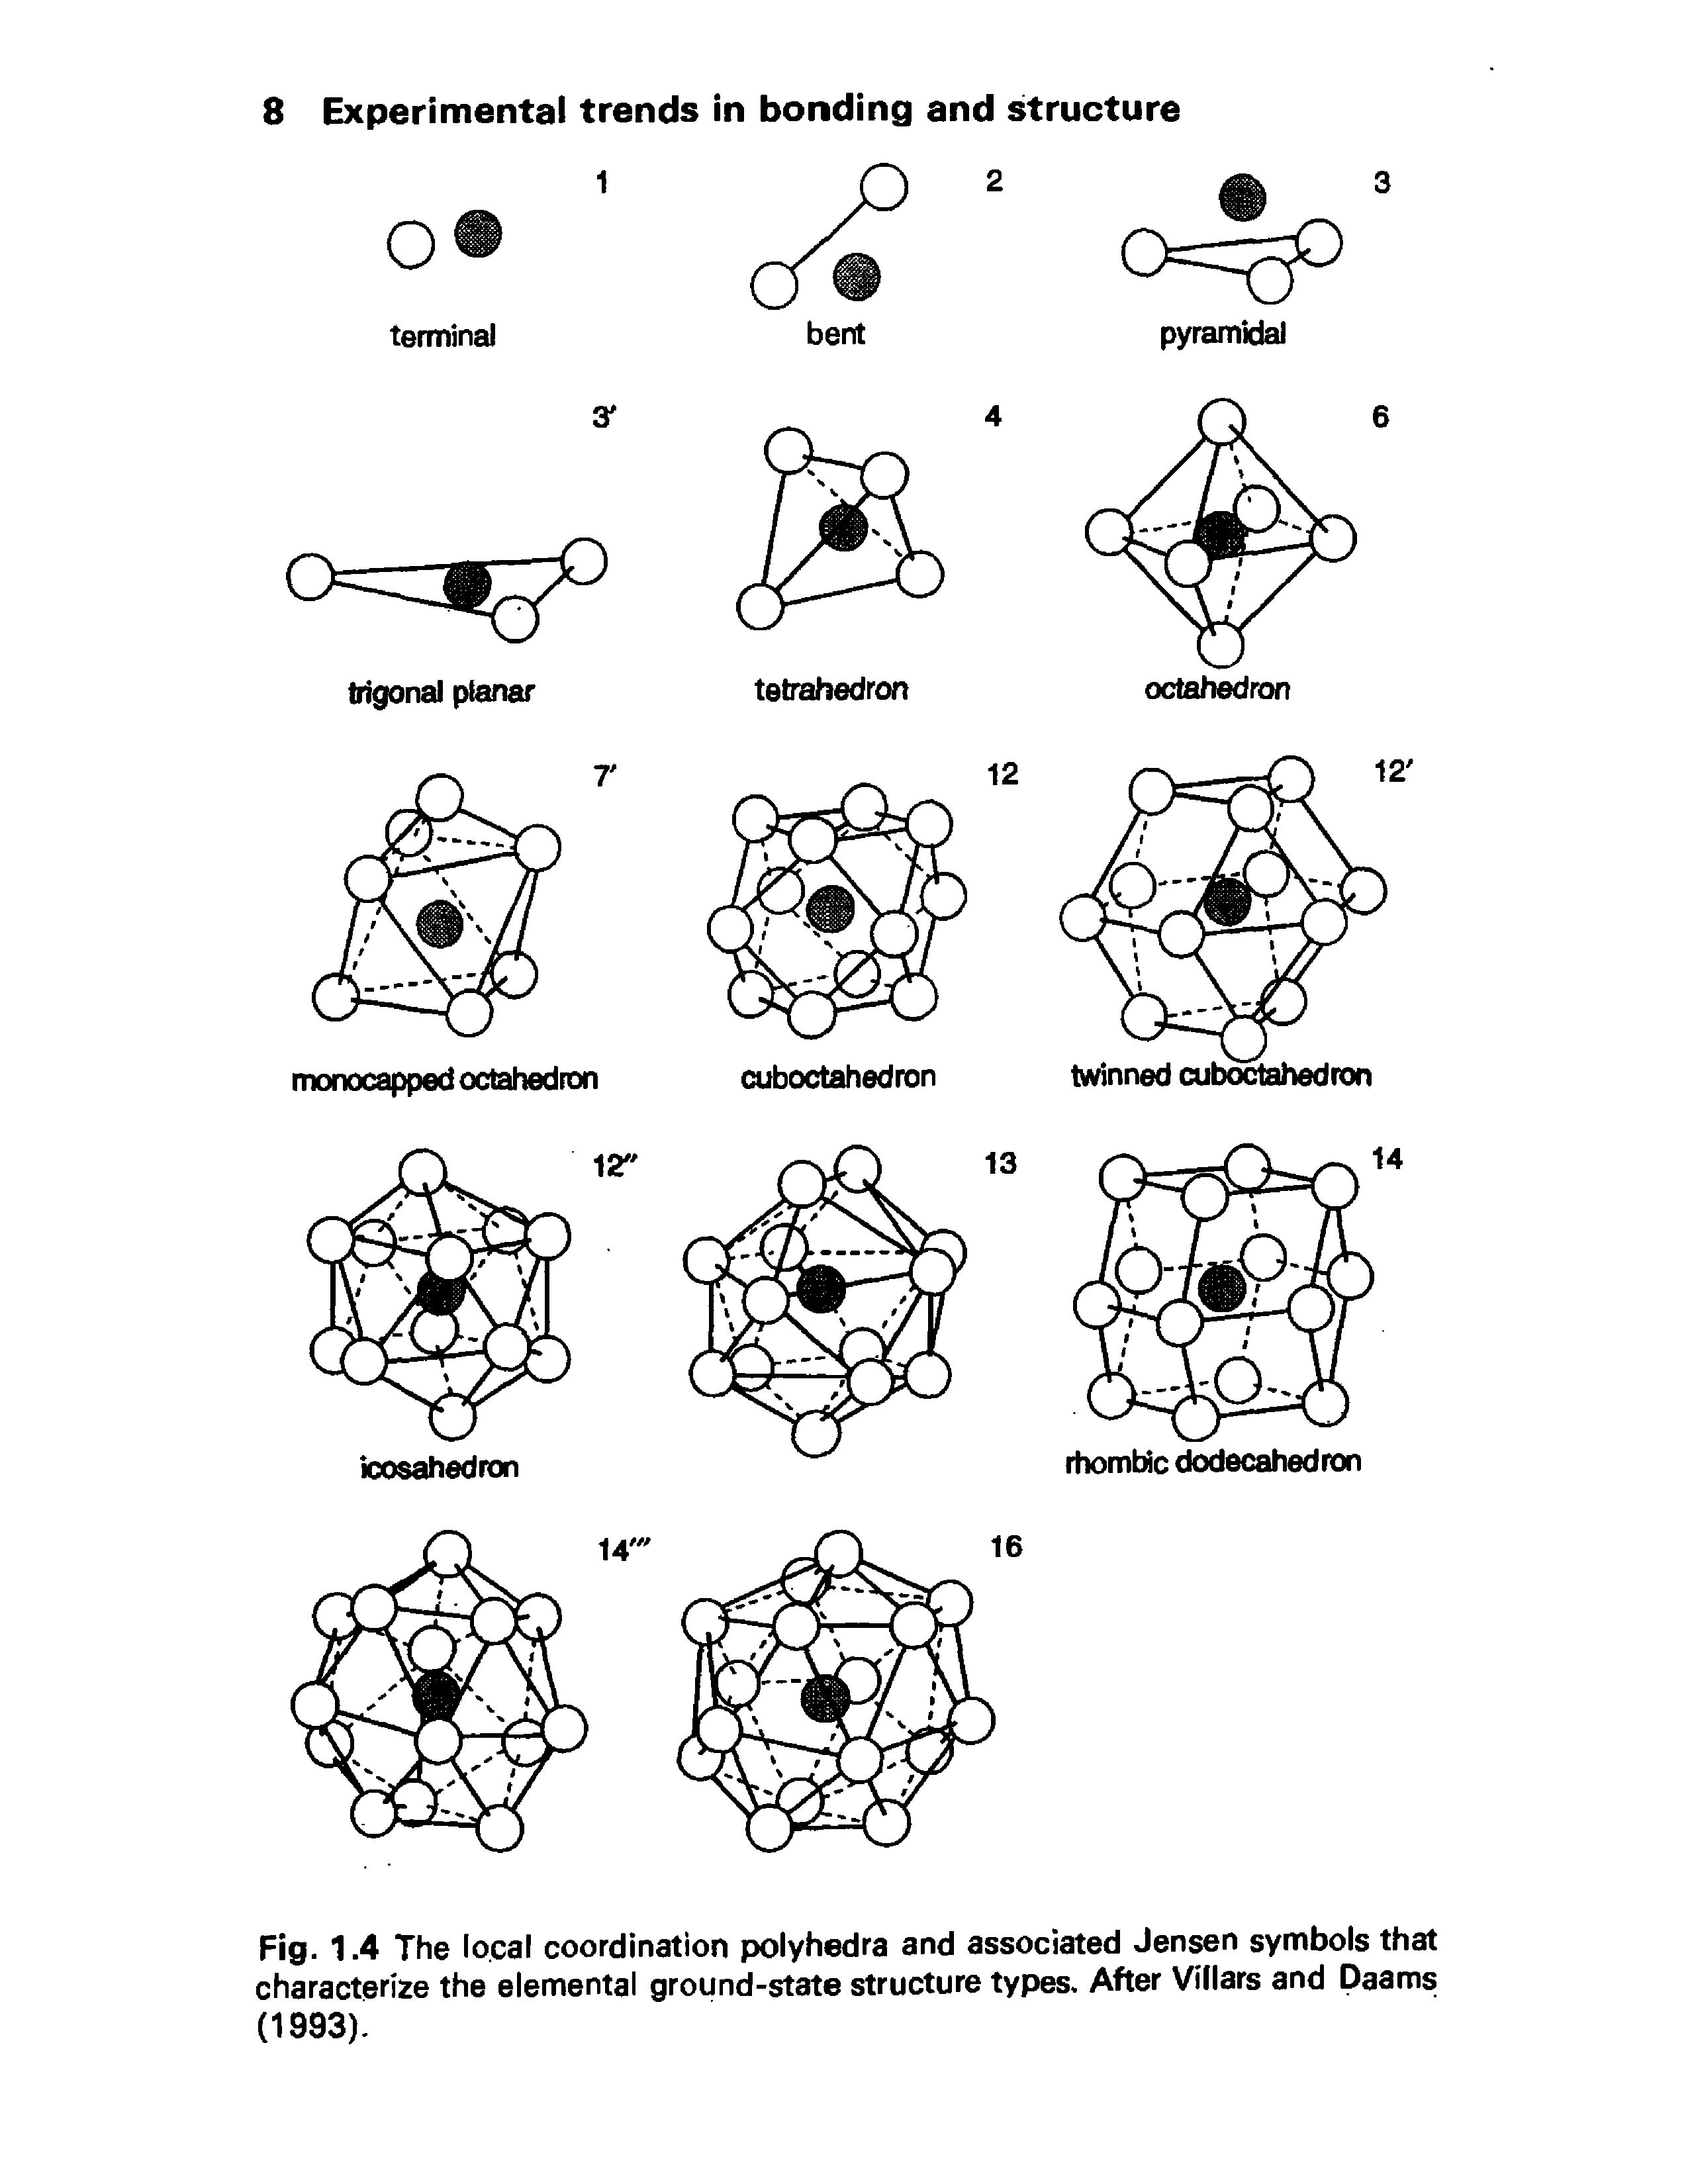 Fig. 1.4 The local coordination polyhedra and associated Jensen symbols that characterize the elemental ground-state structure types. After Villars and Daams (1993).